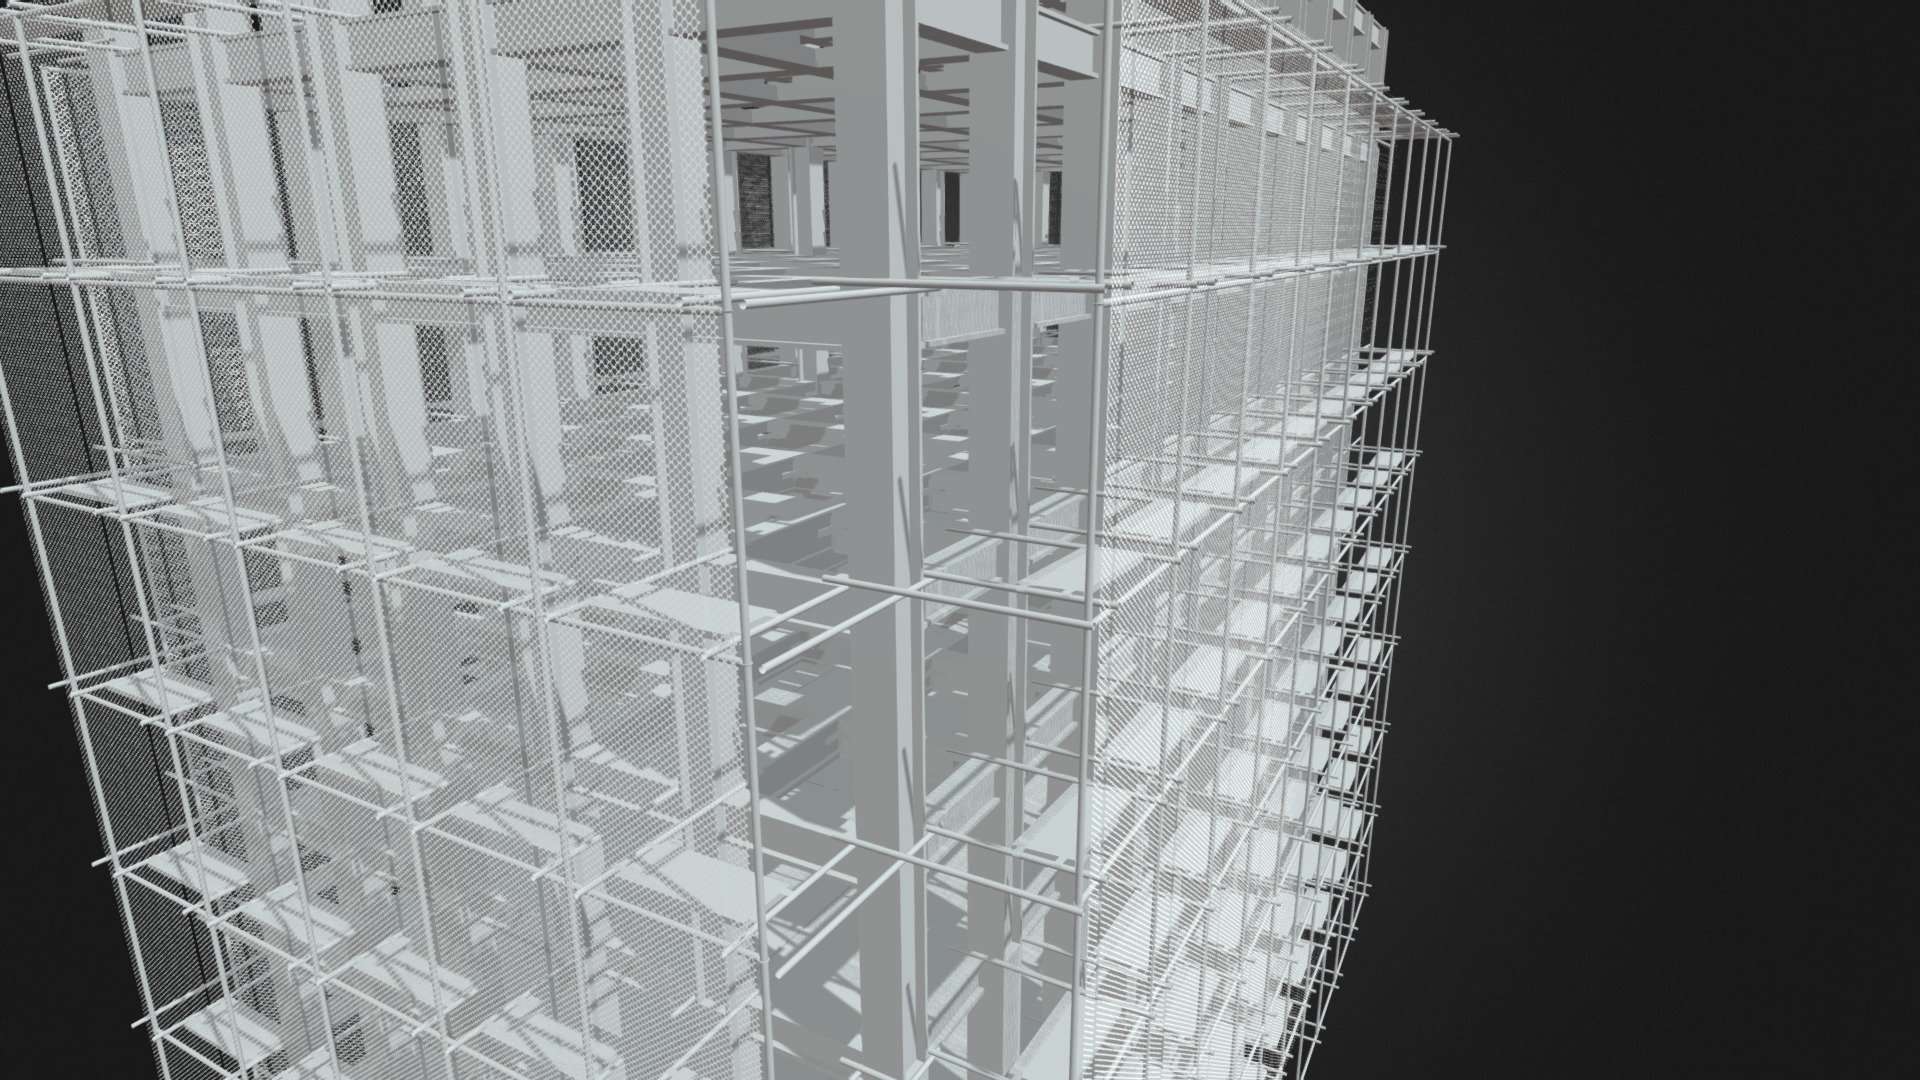 This is a small model extracted from a functional Houdini Digital Asset. The tool simulates the entire construction process of a completely customizable building. It starts to construct a steel beam framework that later gets a concrete coating with the help of a scaffold. In the end the finished framework gets covered with a concrete facade 3d model